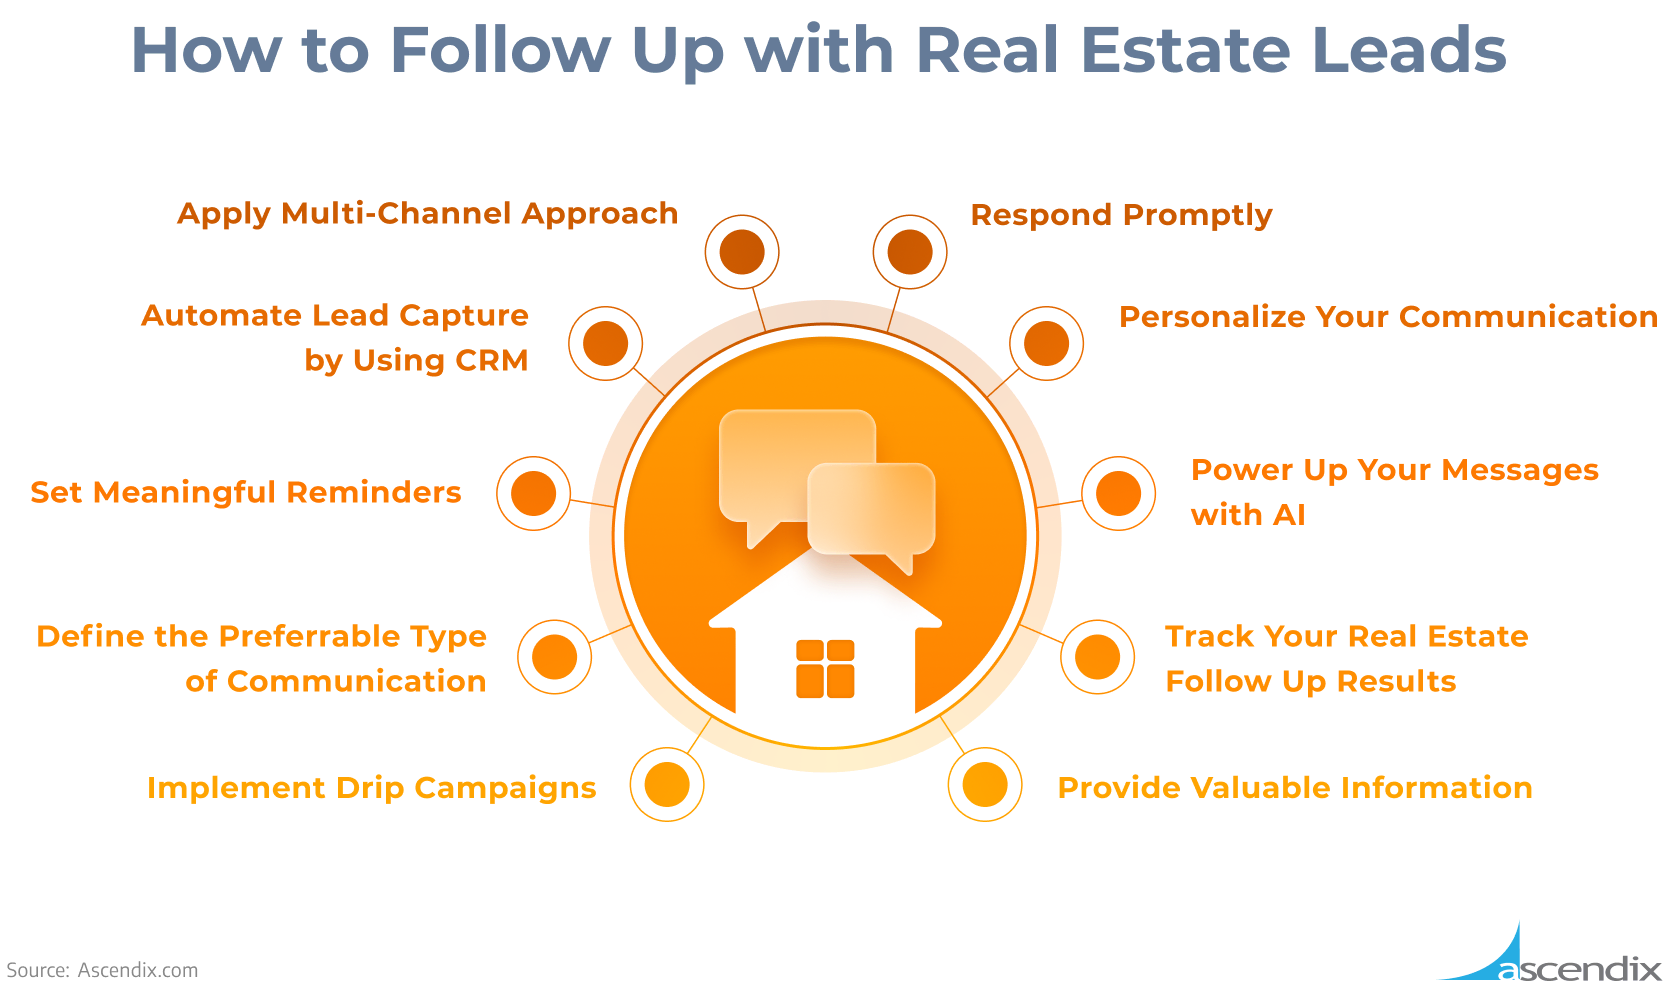 How to Follow Up with Real Estate Leads